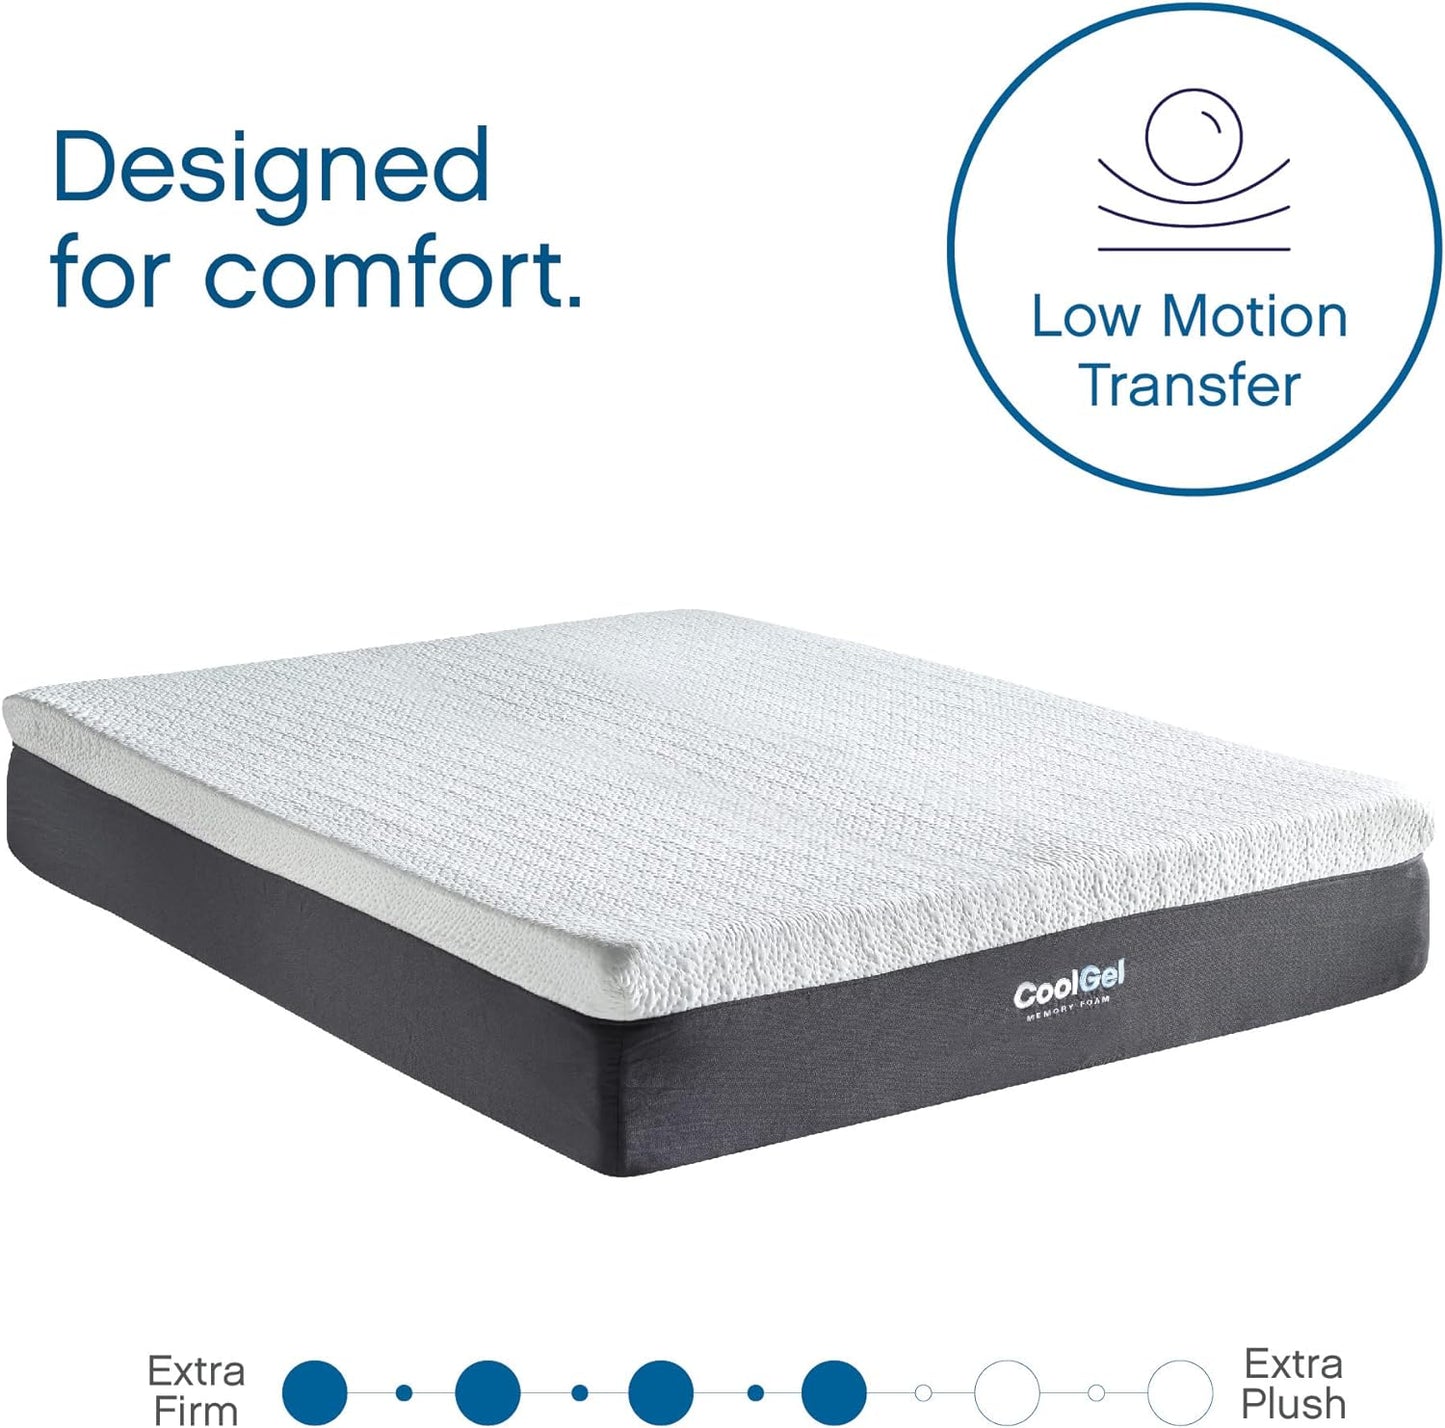 12-Inch Ventilated Memory Foam Mattress | CertiPUR-US Certified | King Size Bed-in-a-Box